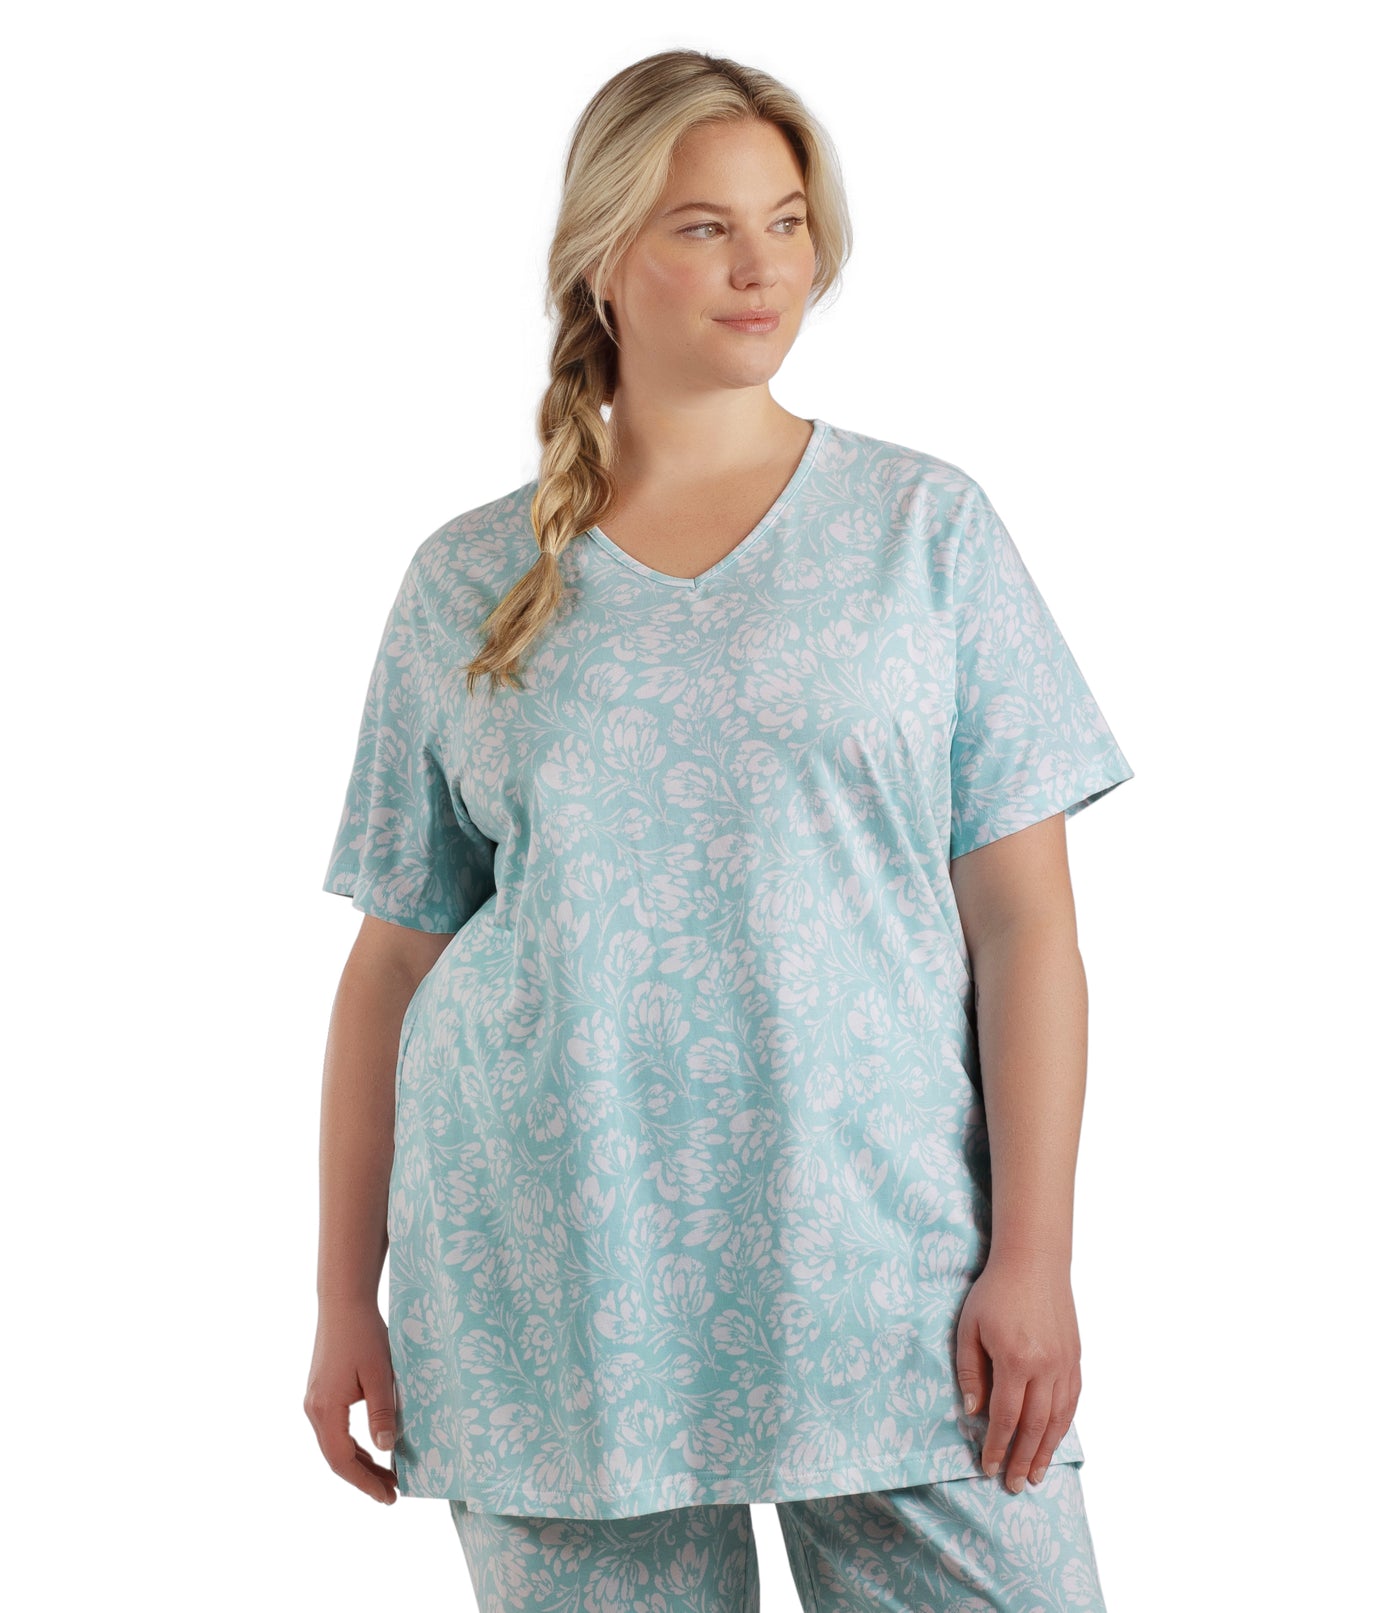 Plus size woman, facing front, wearing JunoActive plus size JunoBliss V-Neck Short Sleeve Sleep Top in color Spring Blue Floral Print. The woman is wearing a pair of JunoBliss Pocketed Sleep Pants in color Spring Blue Floral Print.